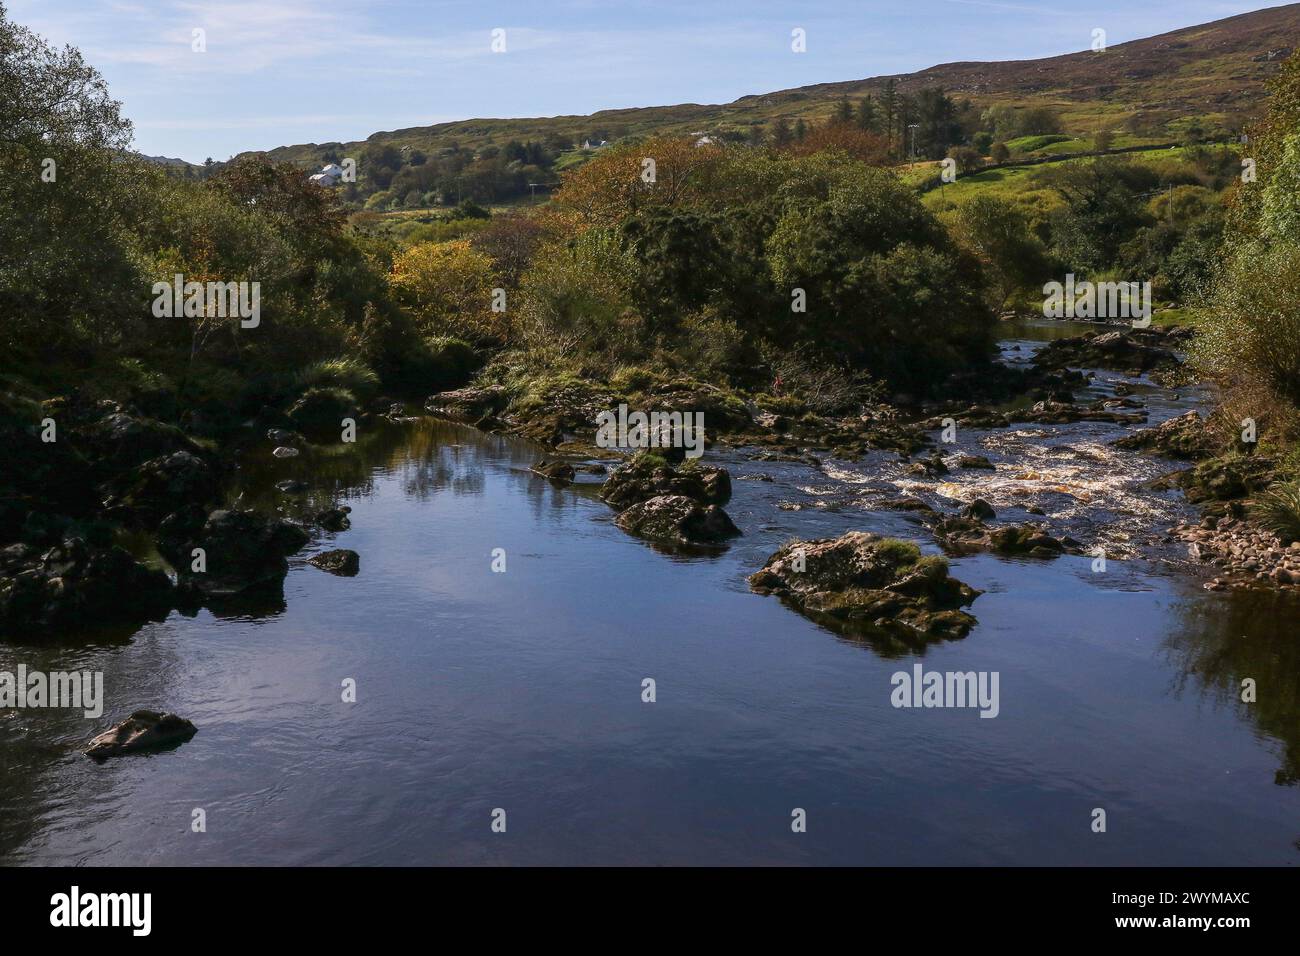 Salmon pool Glen River Slieve League County Donegal Ireland early autumn. Stock Photo